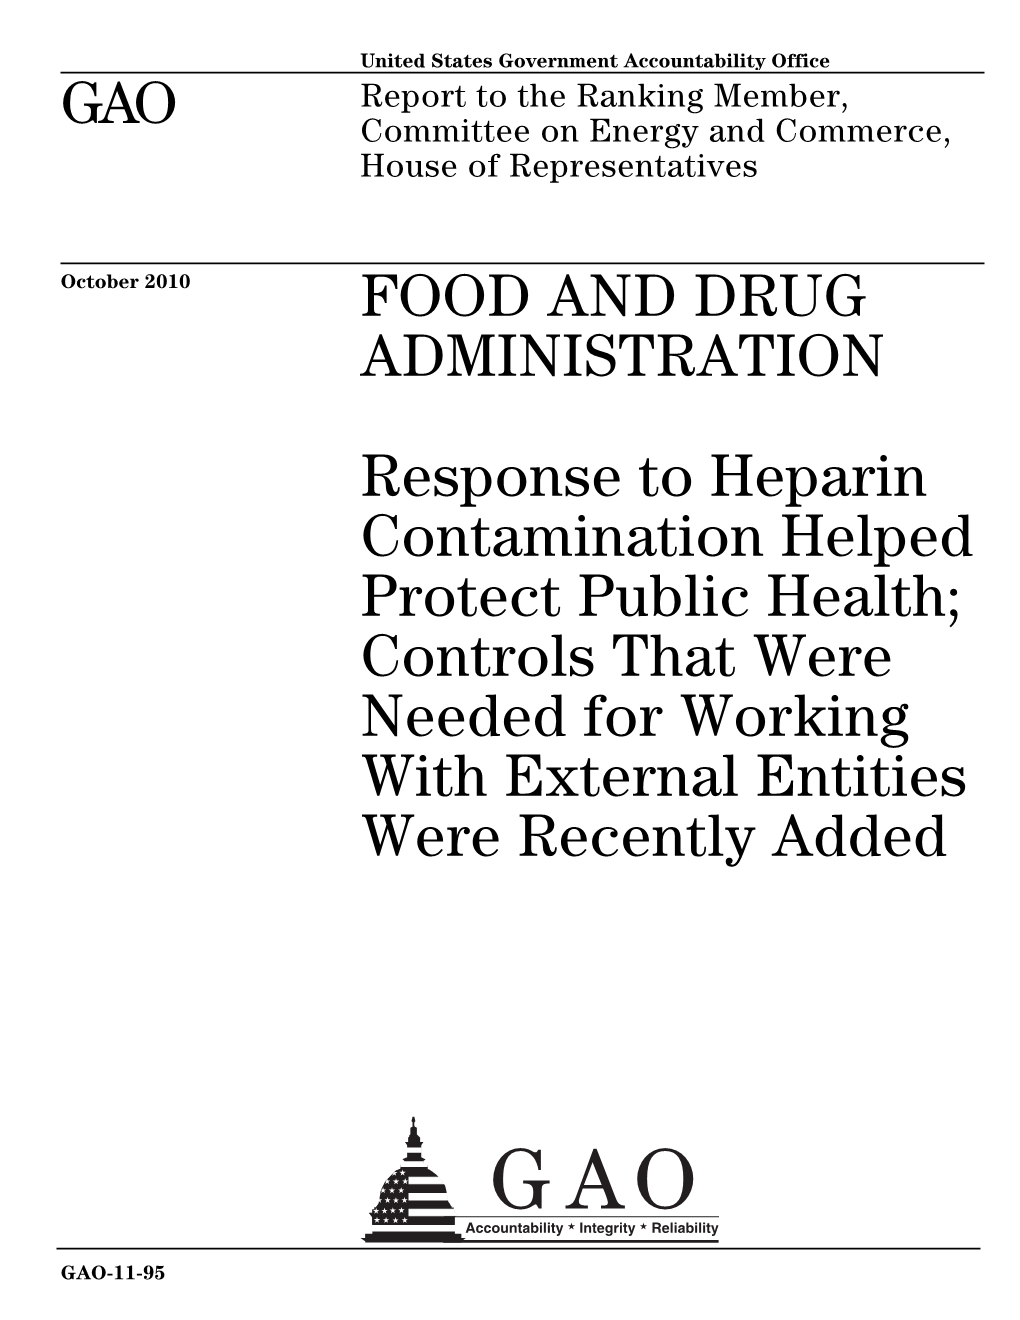 Response to Heparin Contamination Helped Protect Public Health; Controls That Were Needed for Working with External Entities Were Recently Added